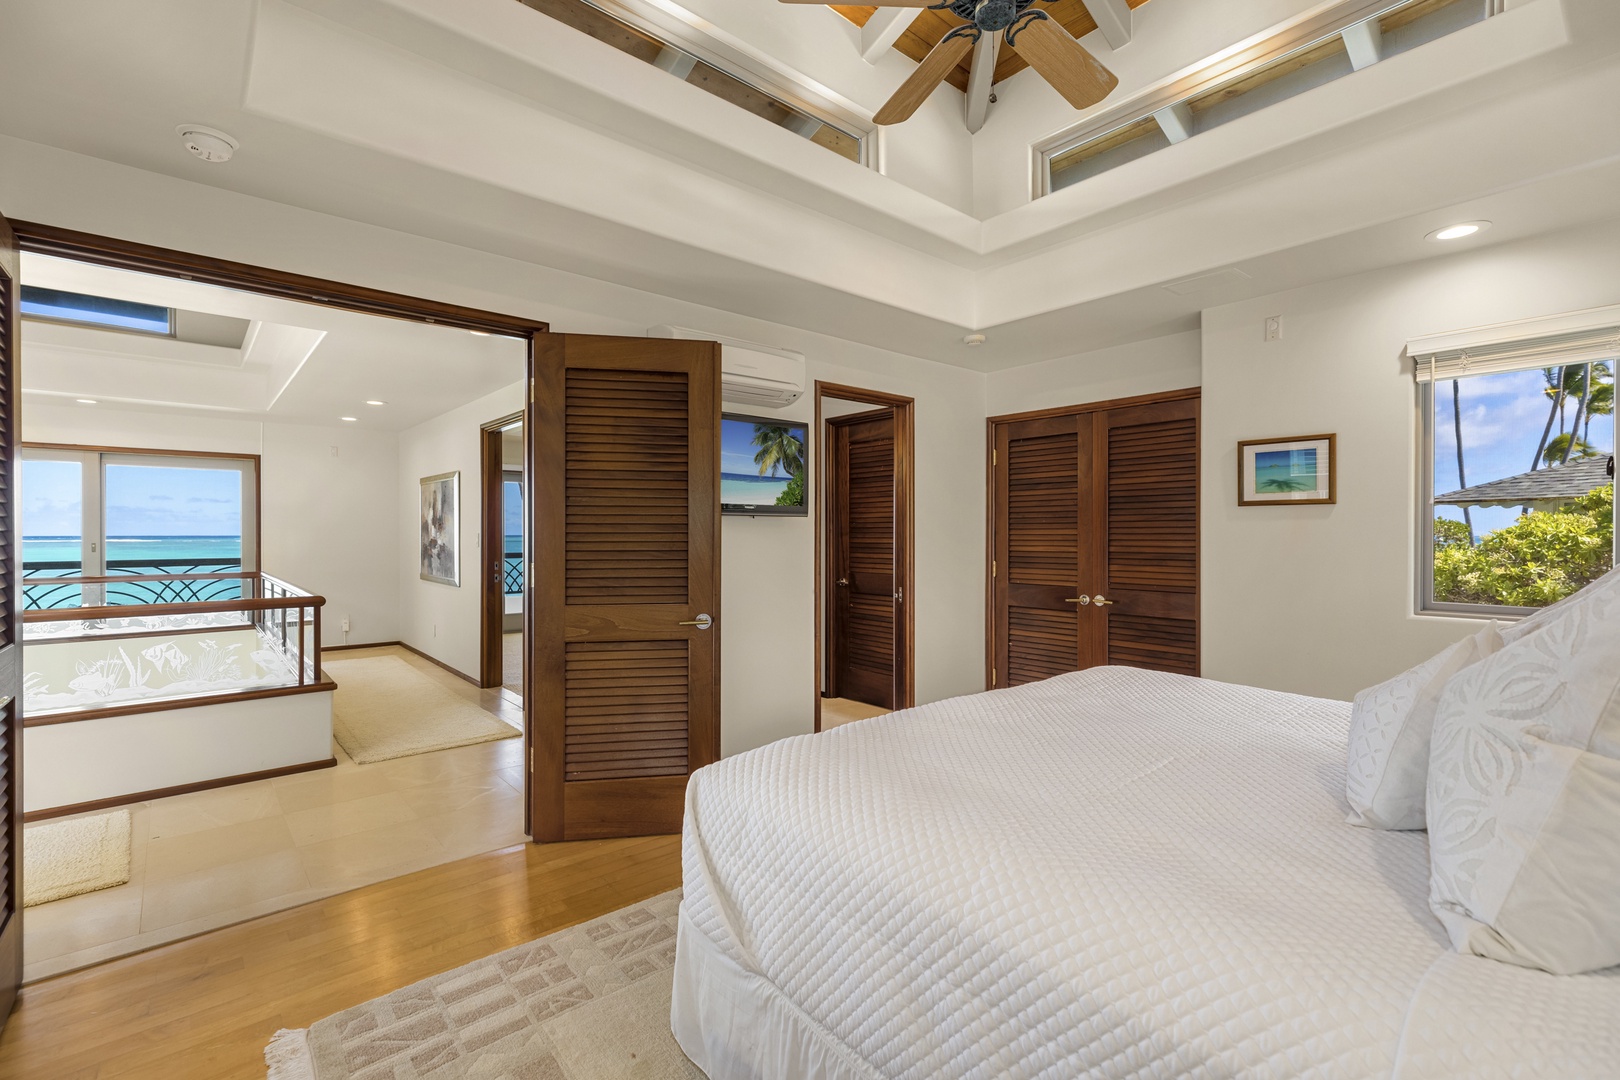 Kailua Vacation Rentals, Mokulua Sunrise - All bedrooms come with air conditioning for optimal temperature control. There is also a laundry room including an in-unit washer and dryer as well as a utility sink and cabinet storage for convenience.